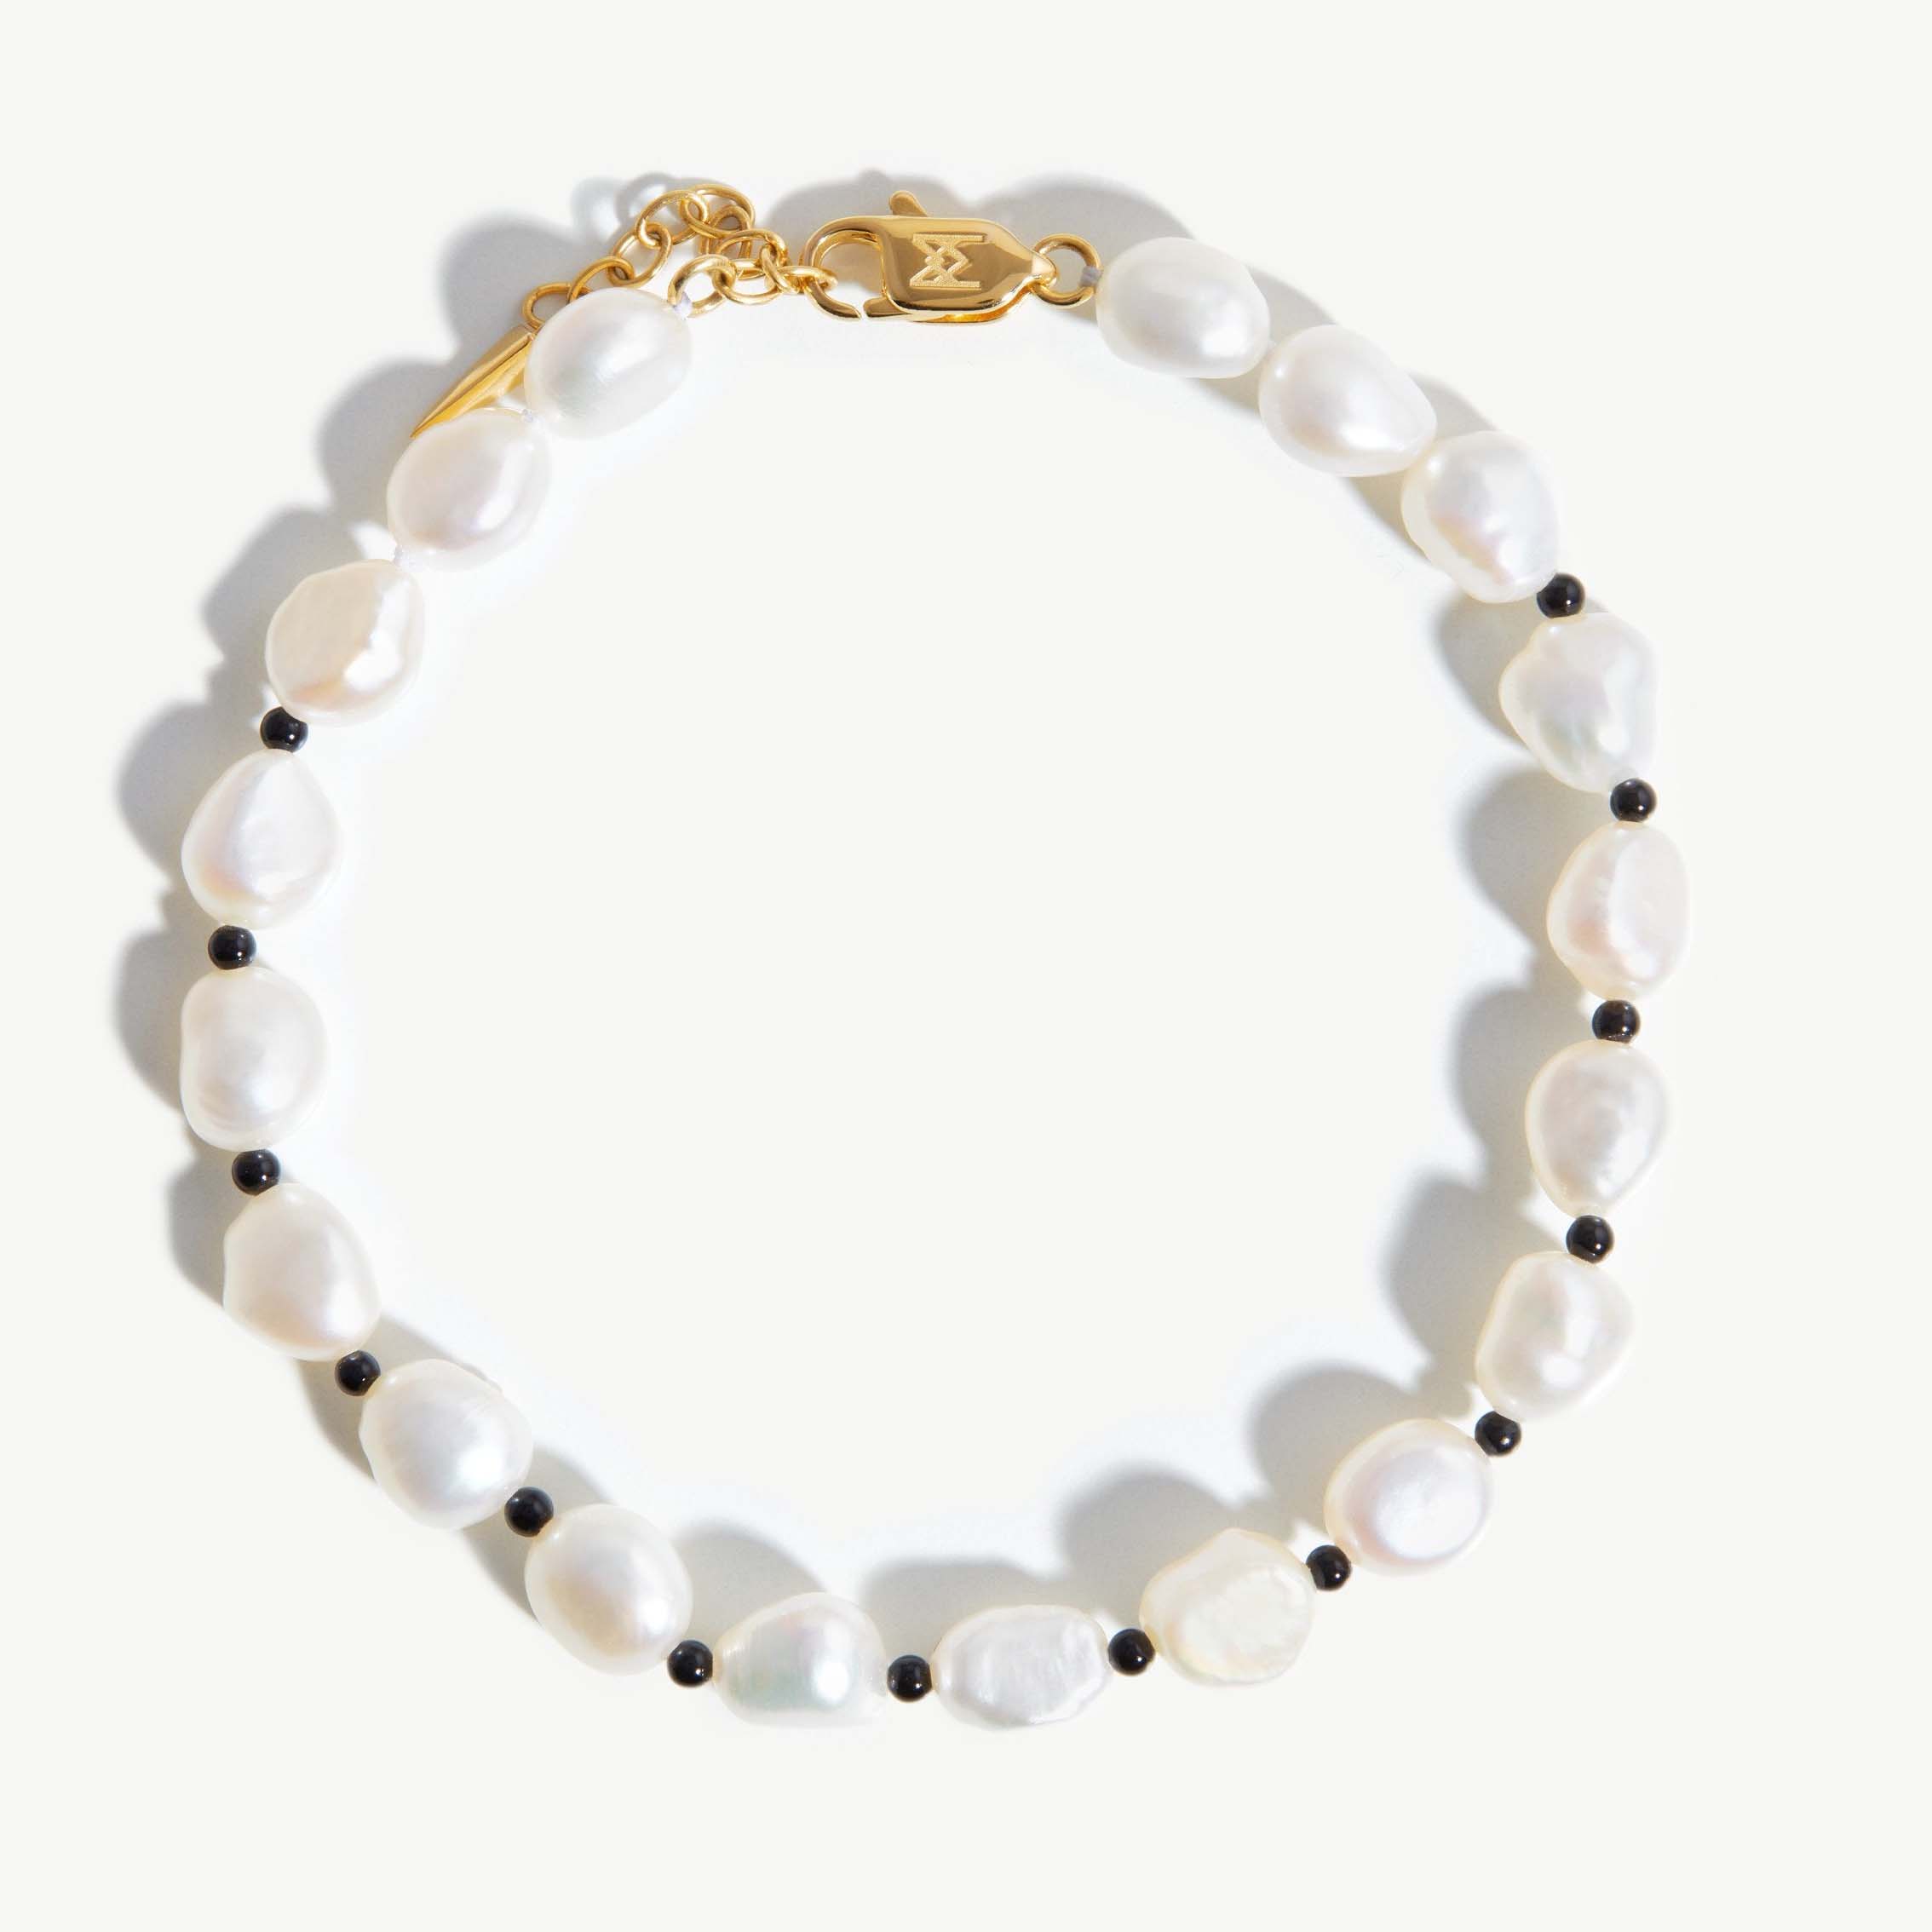 Custom wholesale pearl bracelet in 14k gold plated on sterling silver and start up your business